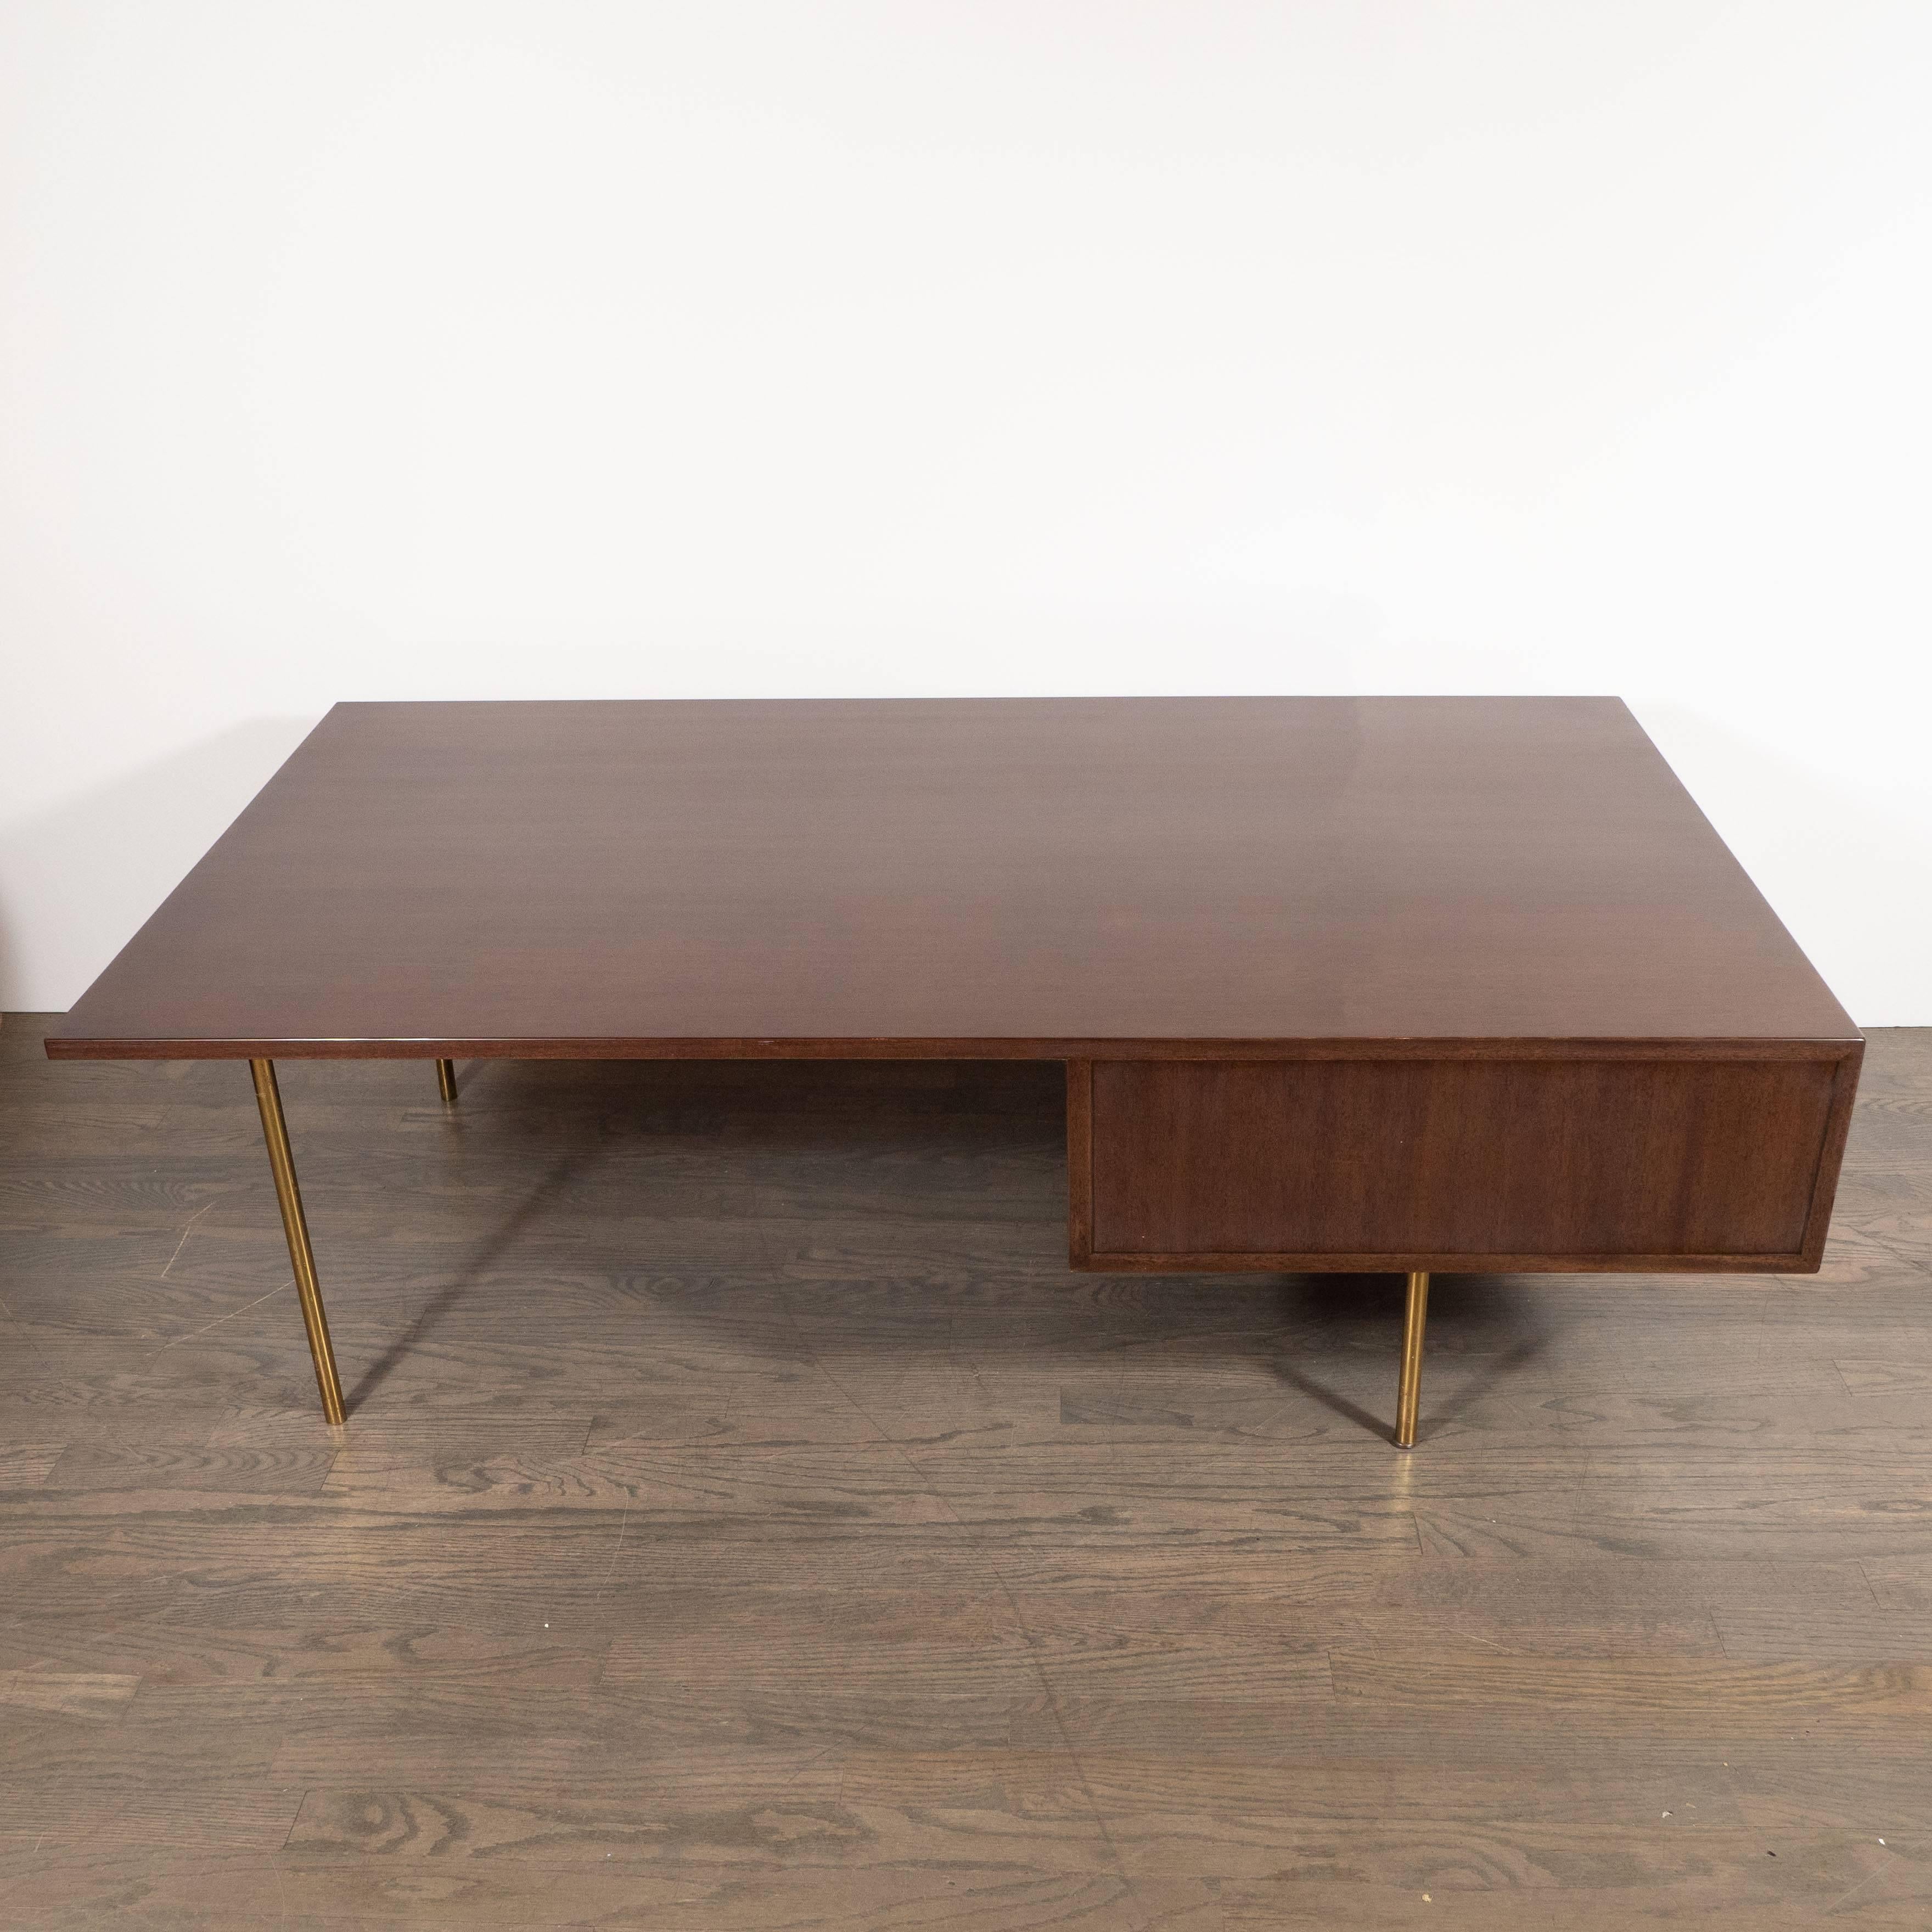 This elegant and refined cocktail table was designed by Harvey Probber and handmade in Fall River, Massachusetts circa 1960. Probber believed that 